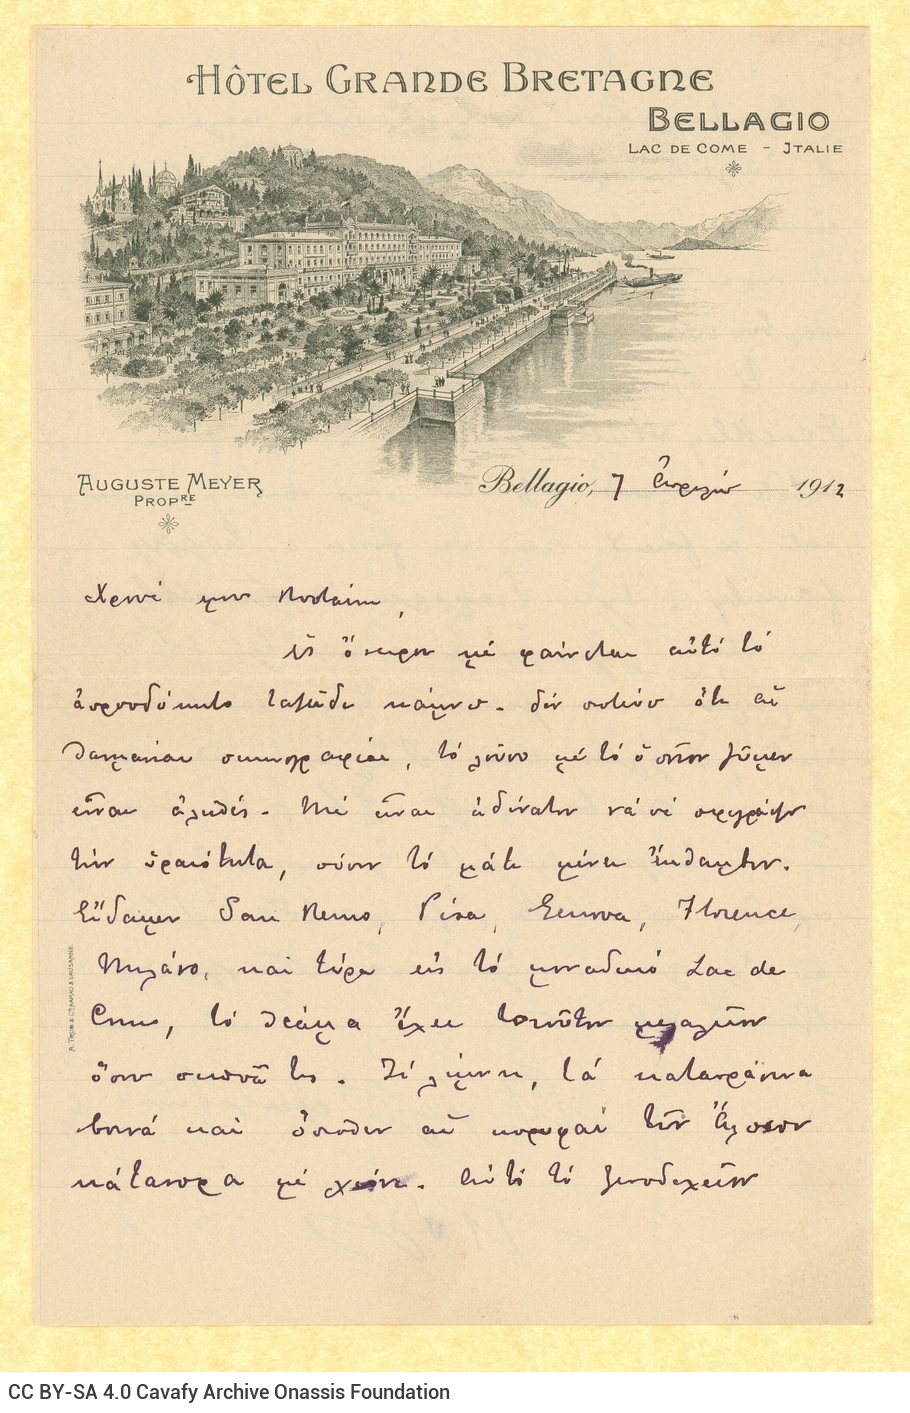 Handwritten letter by Paul Cavafy to C. P. Cavafy from Bellagio, Italy, according to the letterhead, on all sides of a bifoli